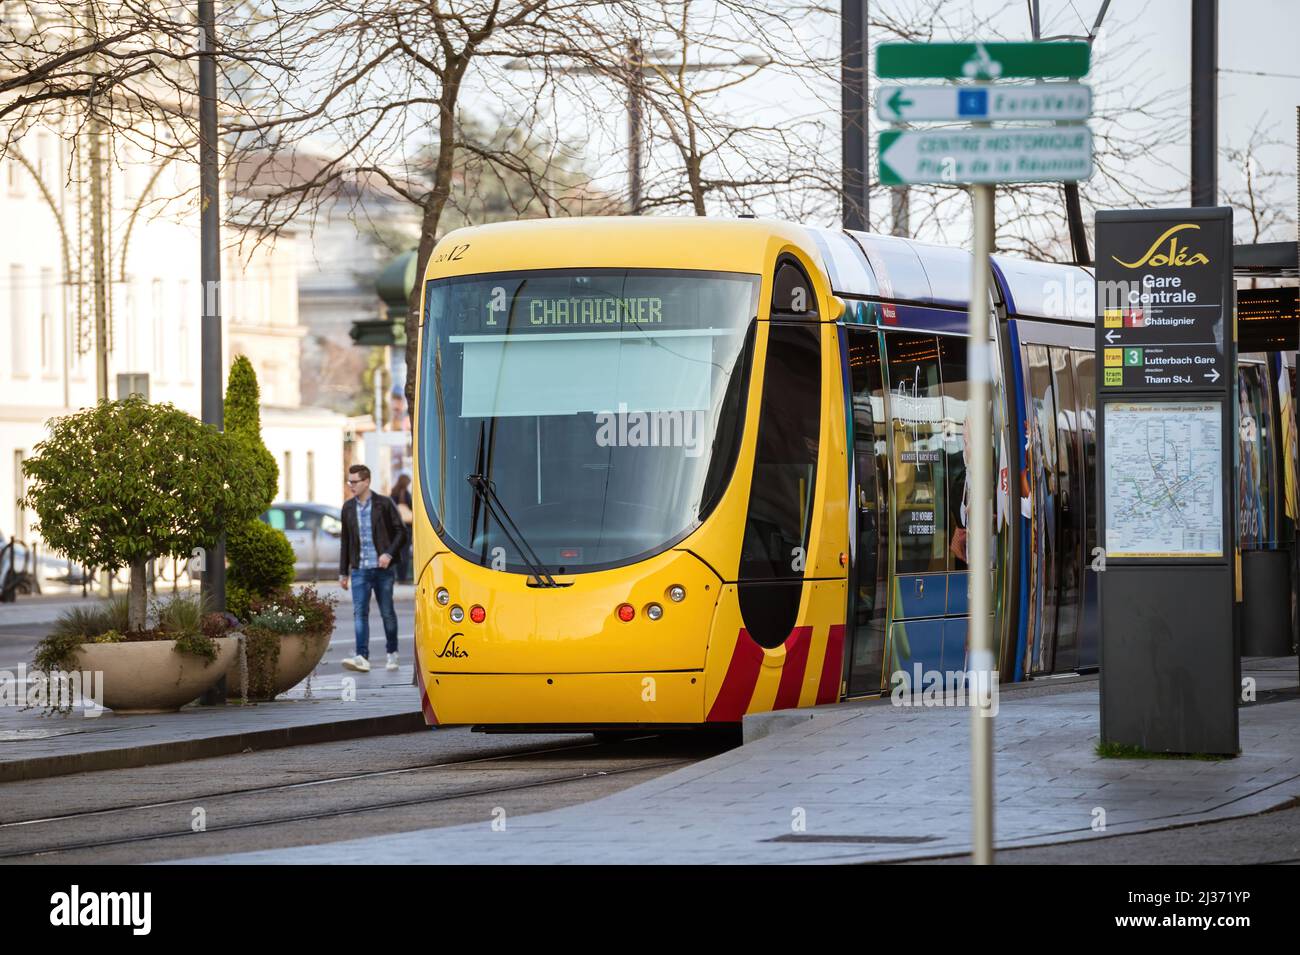 Mulhouse, France - Dec 19, 2015: Front view of 1 Chataignier yellow Tramway de Mulhouse public transportation at the station Gare Centrale - Central Railroad station Stock Photo